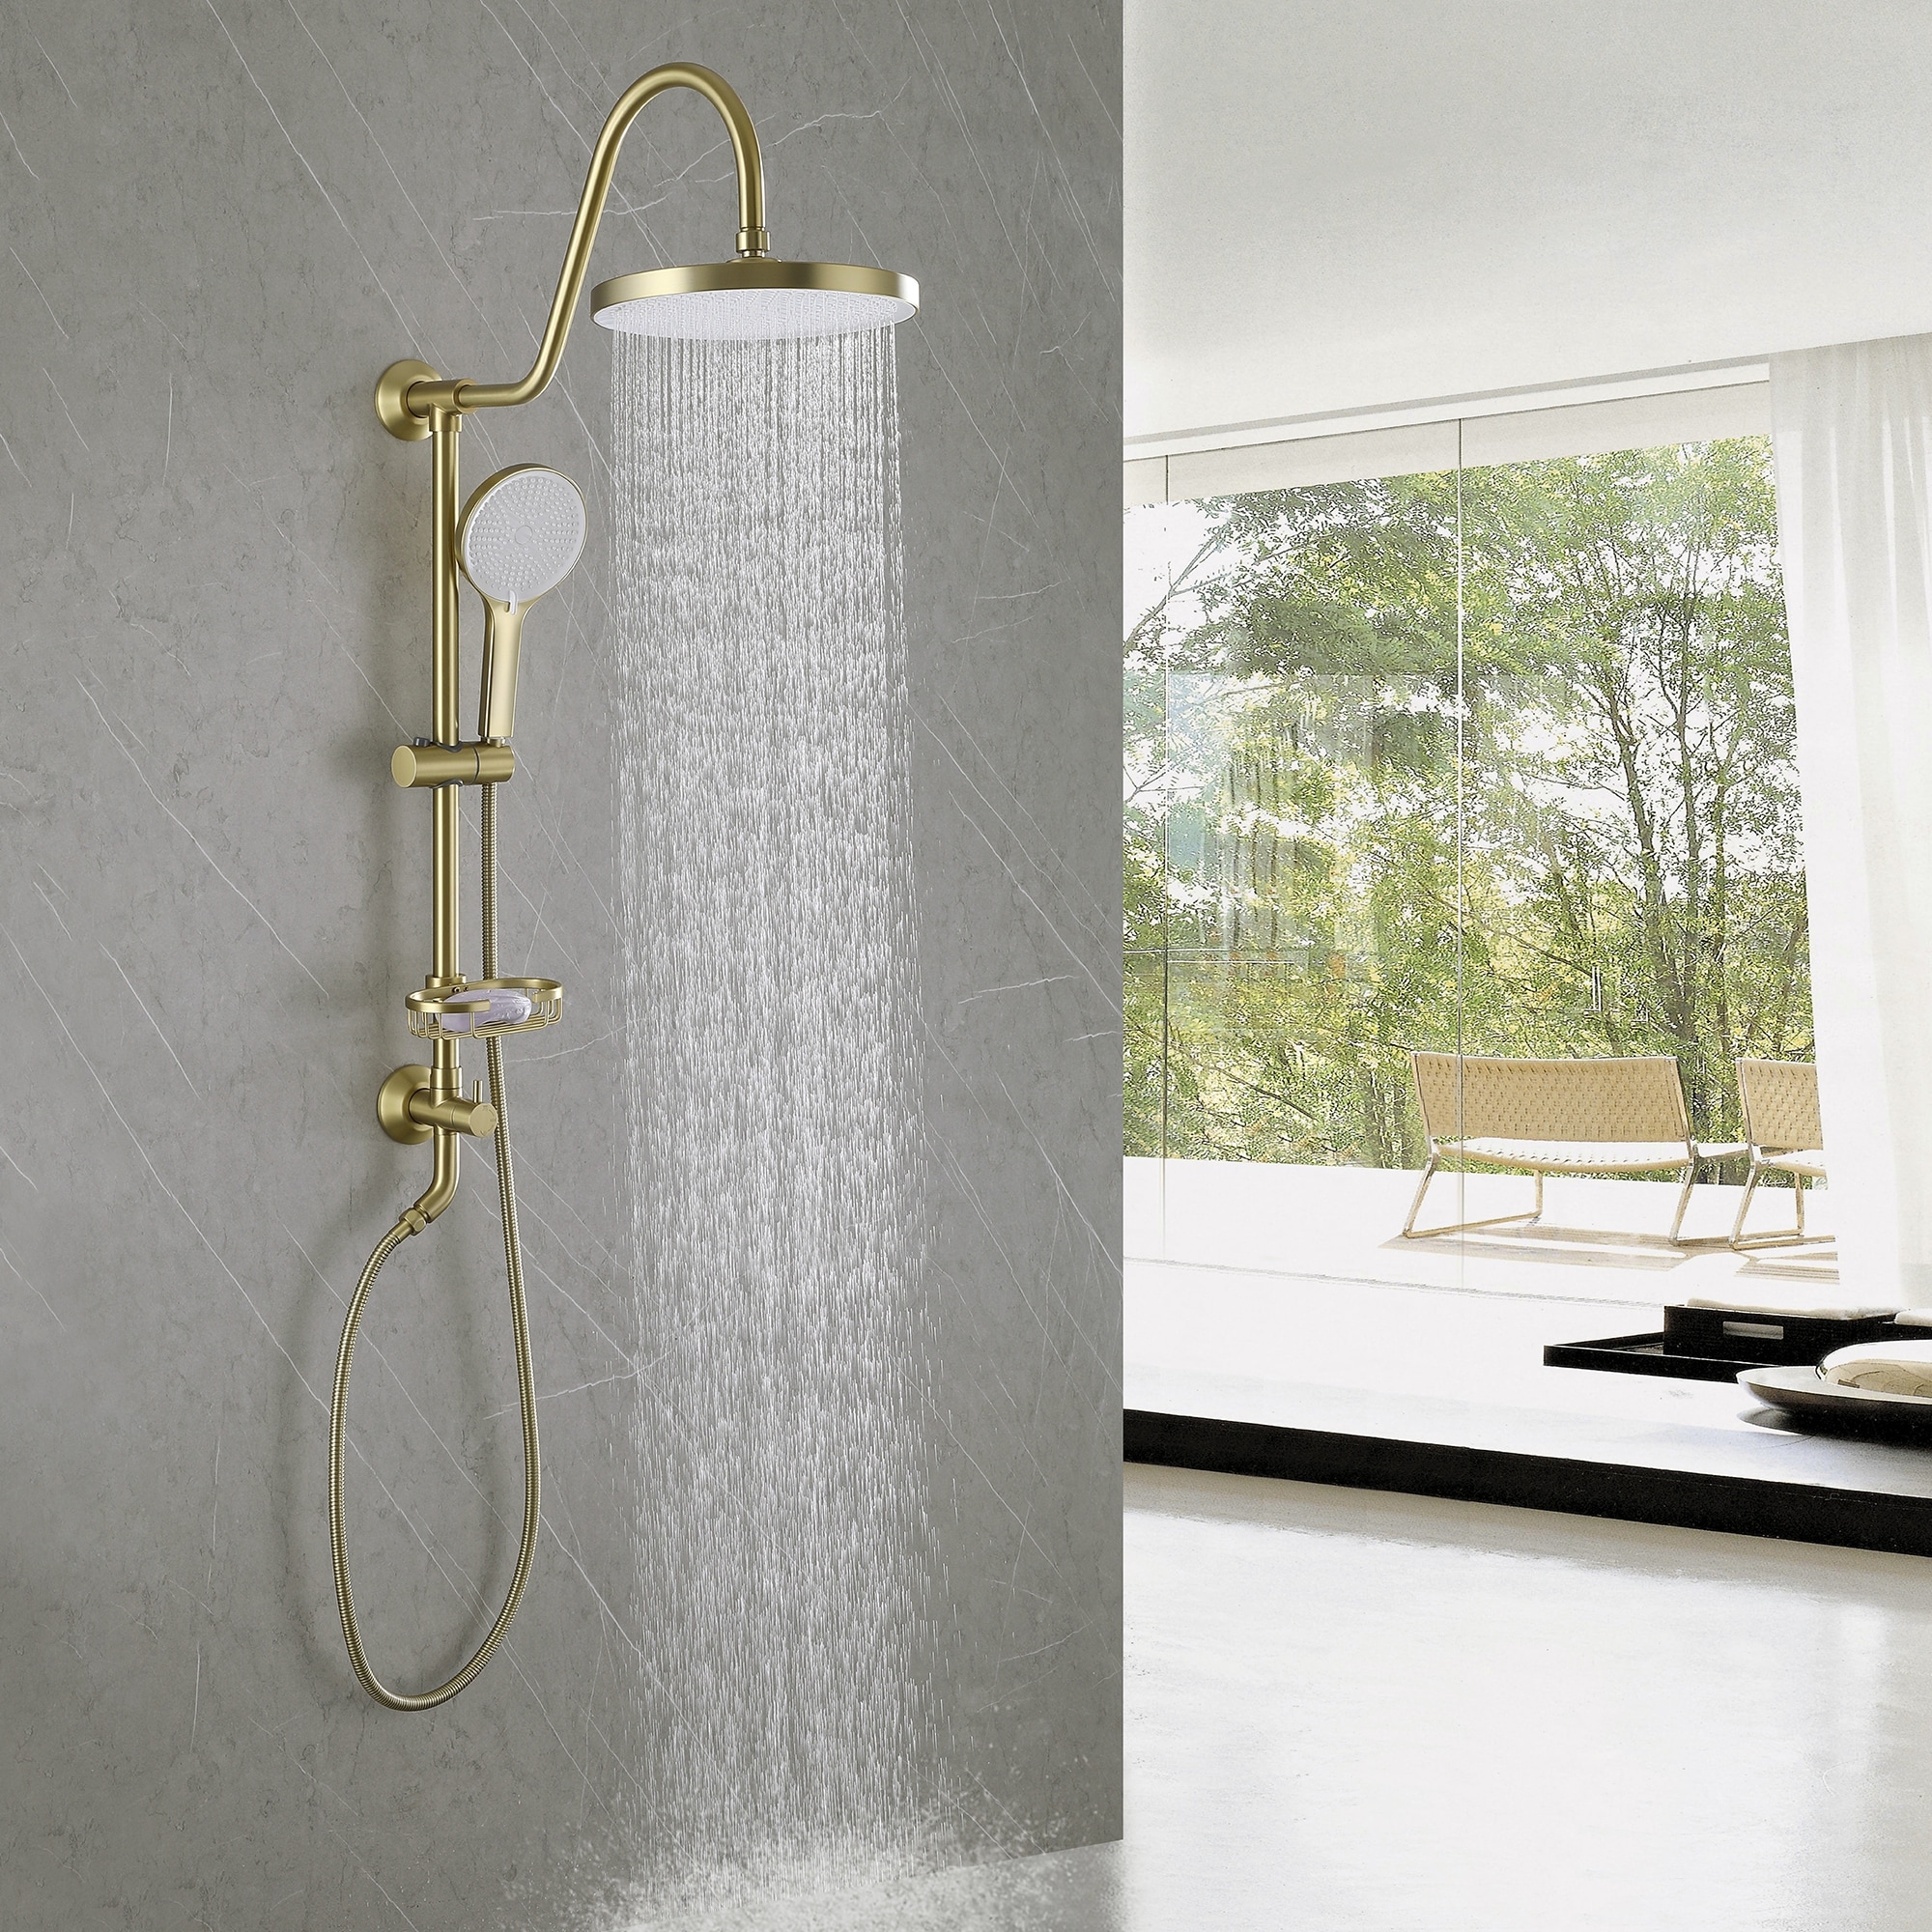 https://ak1.ostkcdn.com/images/products/is/images/direct/5741b59b6a1f003ac9dc1aa850ae9036e69519dc/Wall-mounted-complete-shower-system-with-soap-dish-%28not-including-the-rough-in-valve%29.jpg